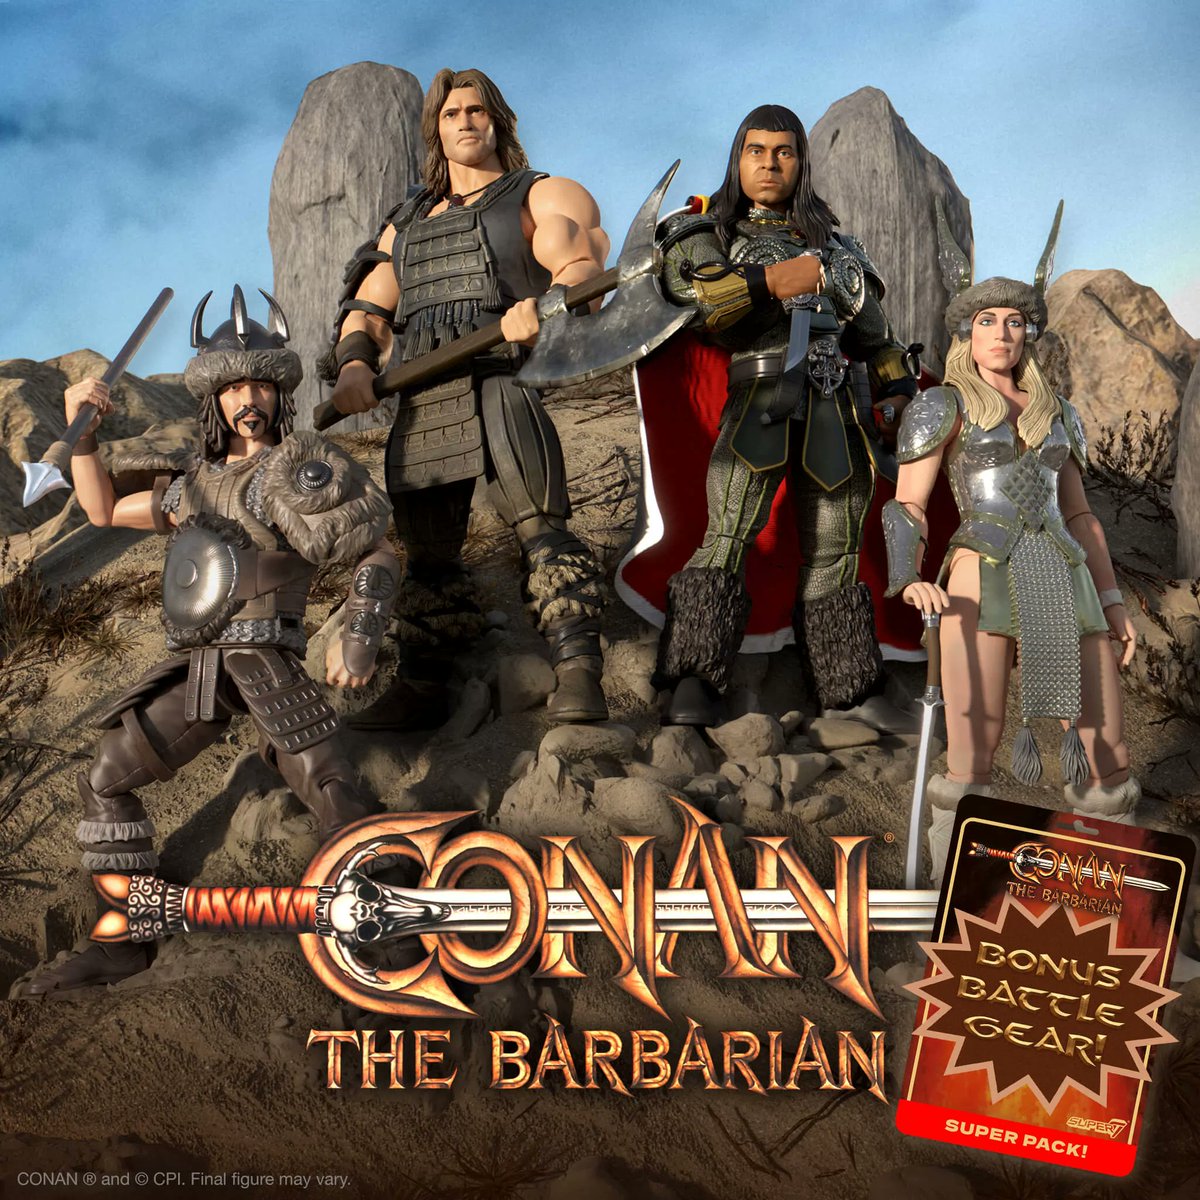 Conan the Barbarian ULTIMATES! Wave 5 Up for Pre-Order from Super7  buff.ly/3nygc0b  @super7store #ConanTheBarbarian #super7ultimates #ConanUltimates #actionfigures #preorder #pastramination #themeatofpopculture